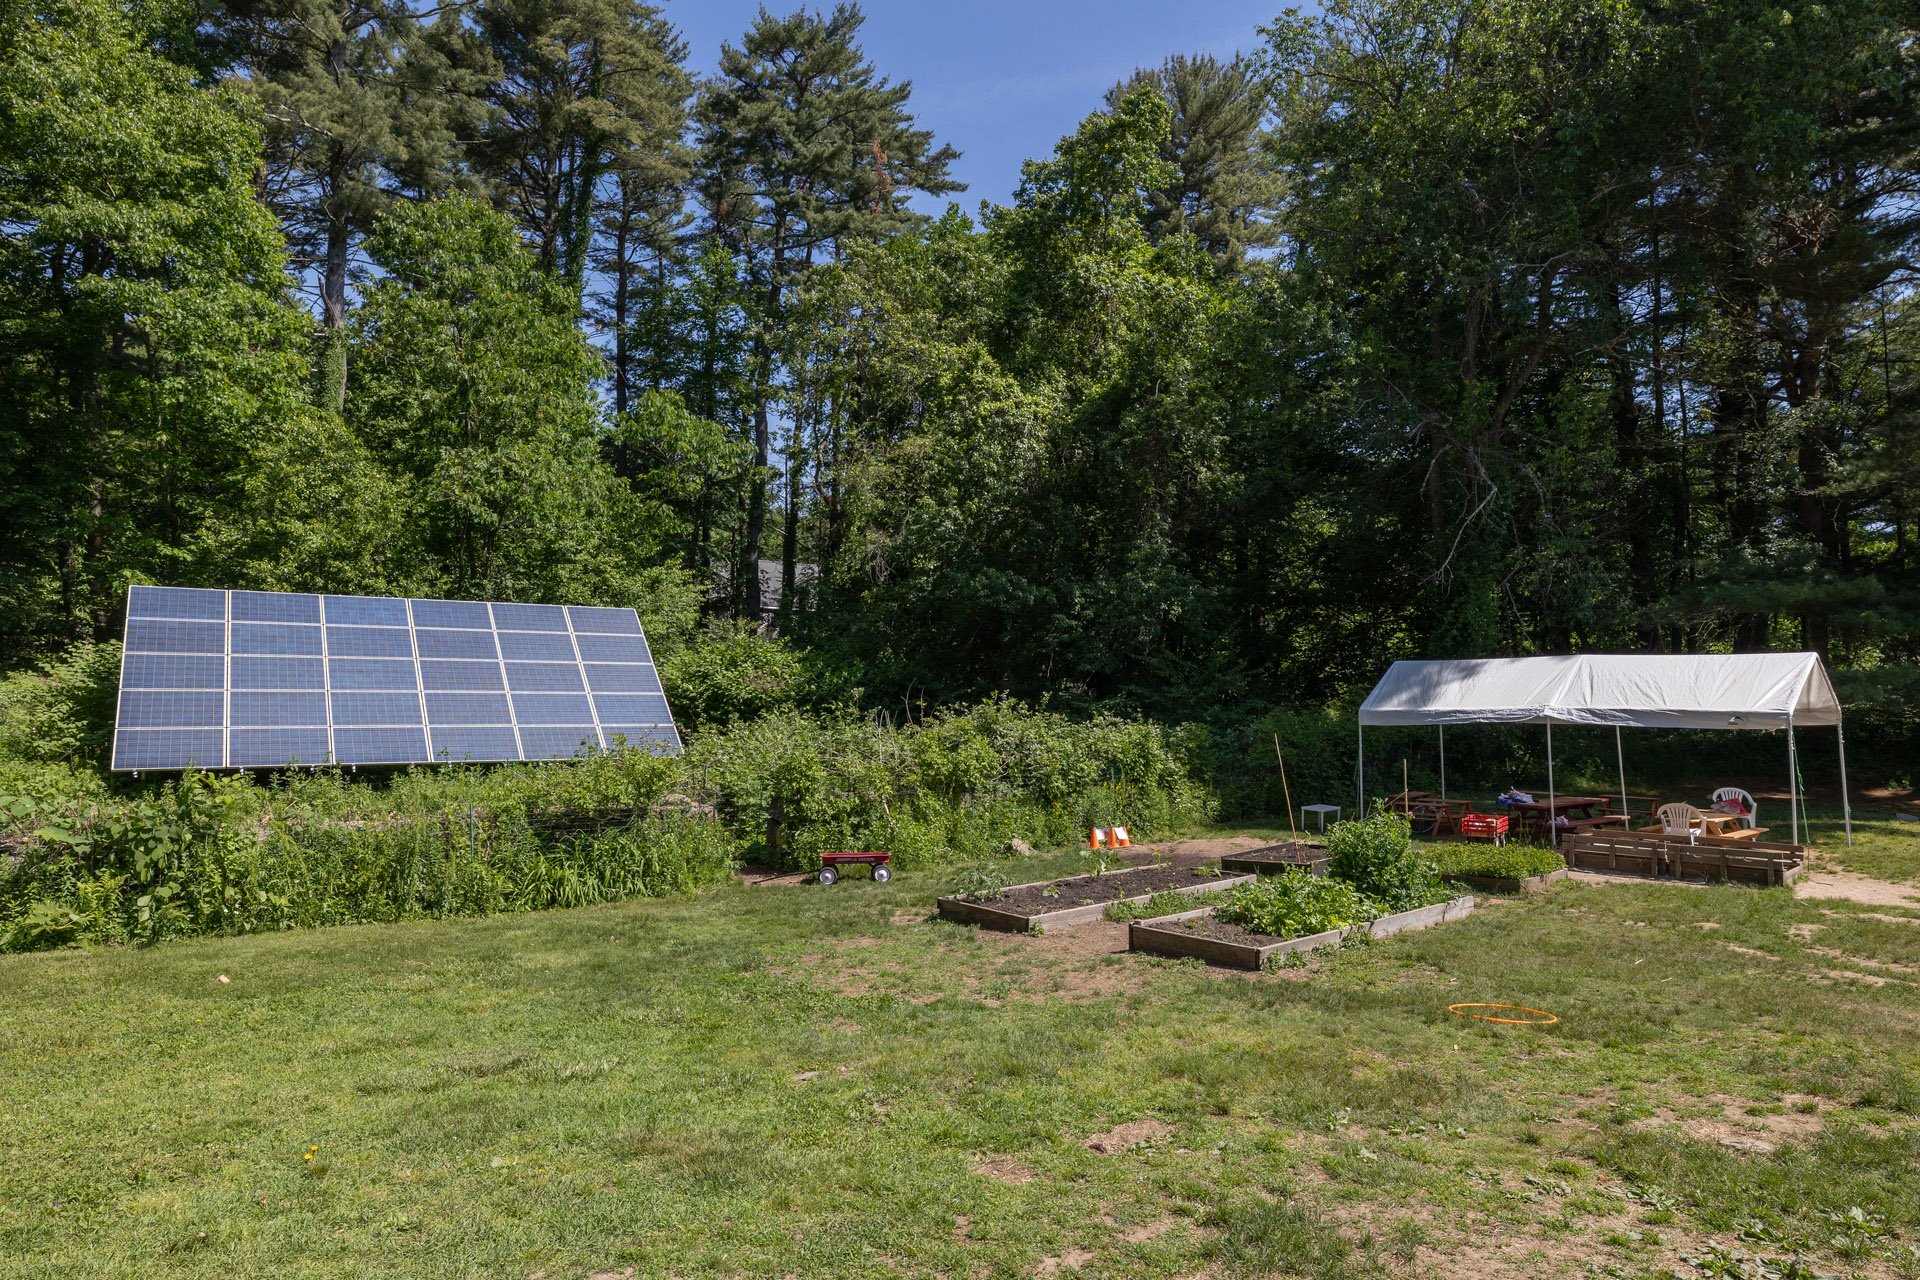 Solar panel in green vegetation to the left, and three garden plots and a white tent cover to the right.